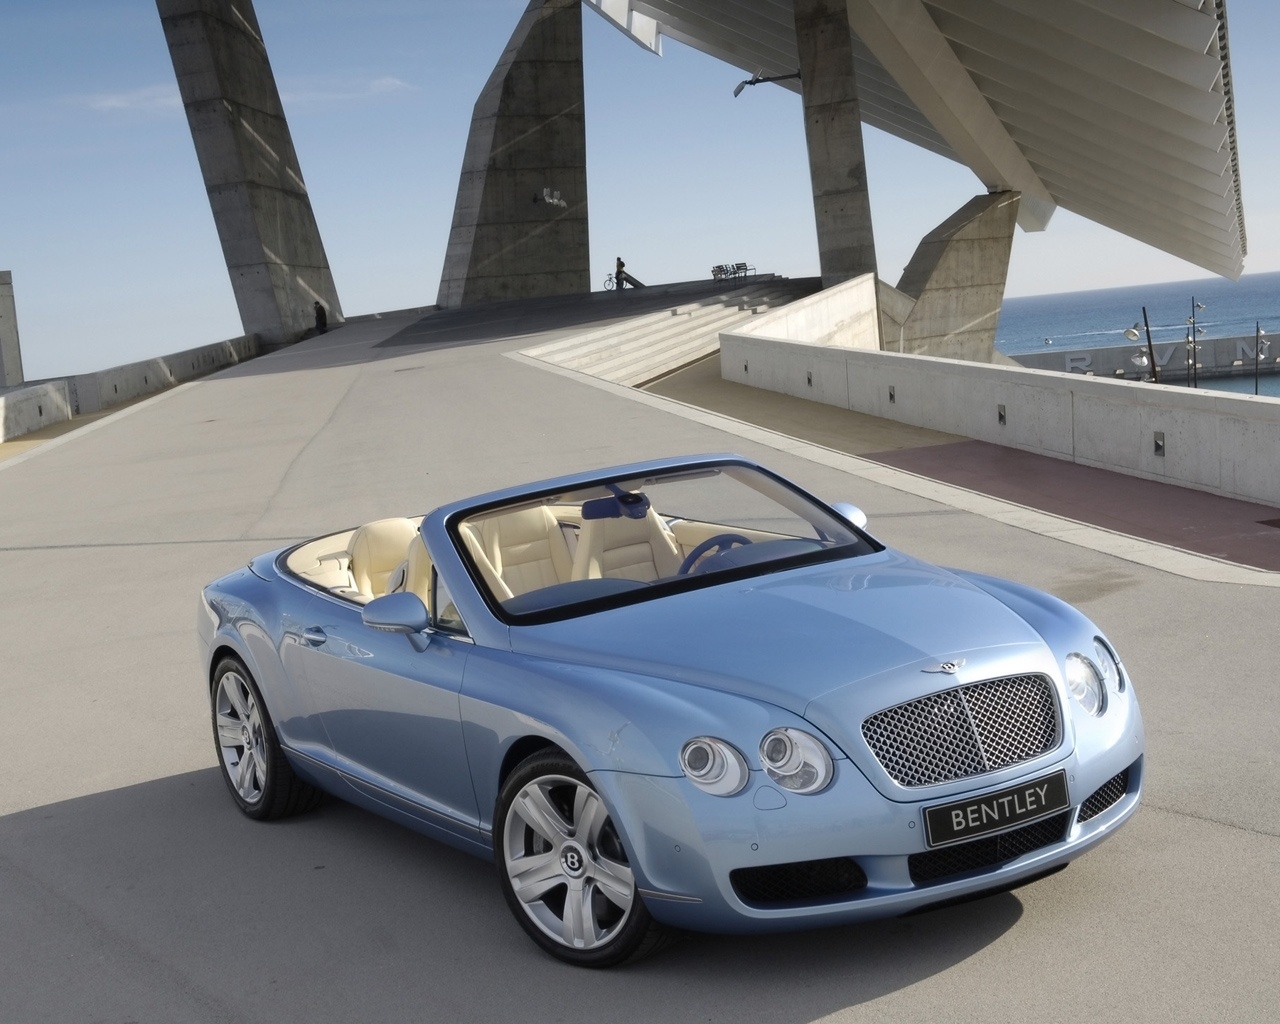 Bentley Continental GTC 2007 for 1280 x 1024 resolution